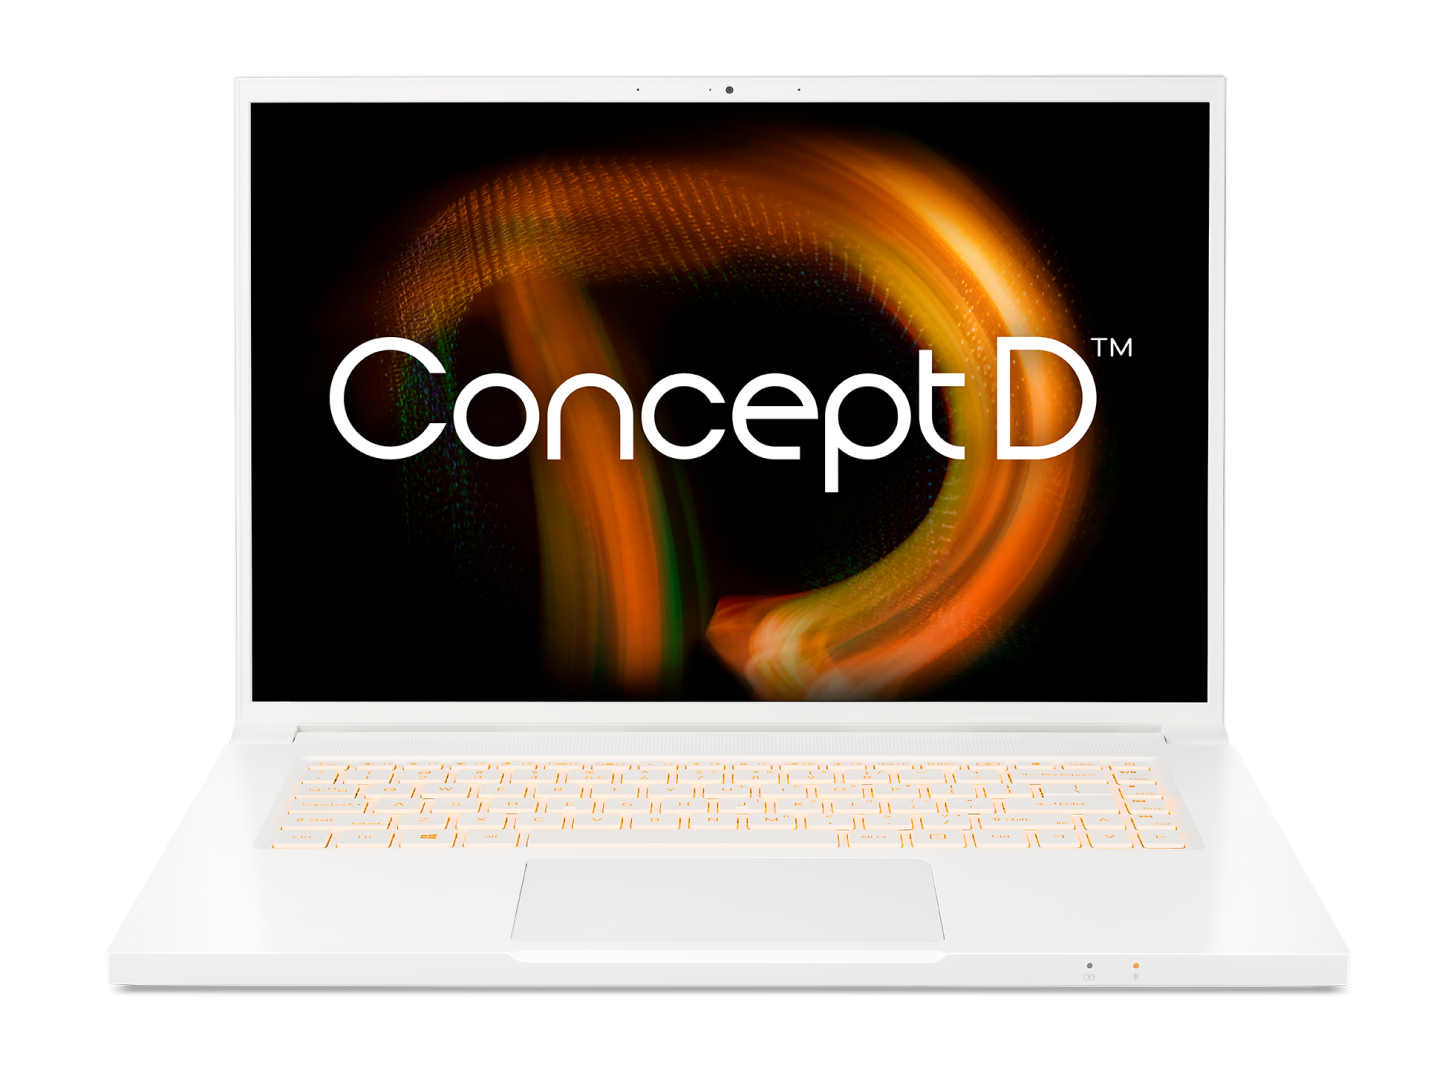 Laptop Acer ConceptD 3 CN316-73G, 16.0" display with IPS (In-Plane Switching) technology, WUXGA 1920 x 1200, high-brightness (400 nits) Acer ComfyView LED-backlit TFT LCD, 16:10 aspect ratio, sRGB 100%, Wide viewing angle up to 170 degrees, Slim and narrow border design, Mercury free, environment